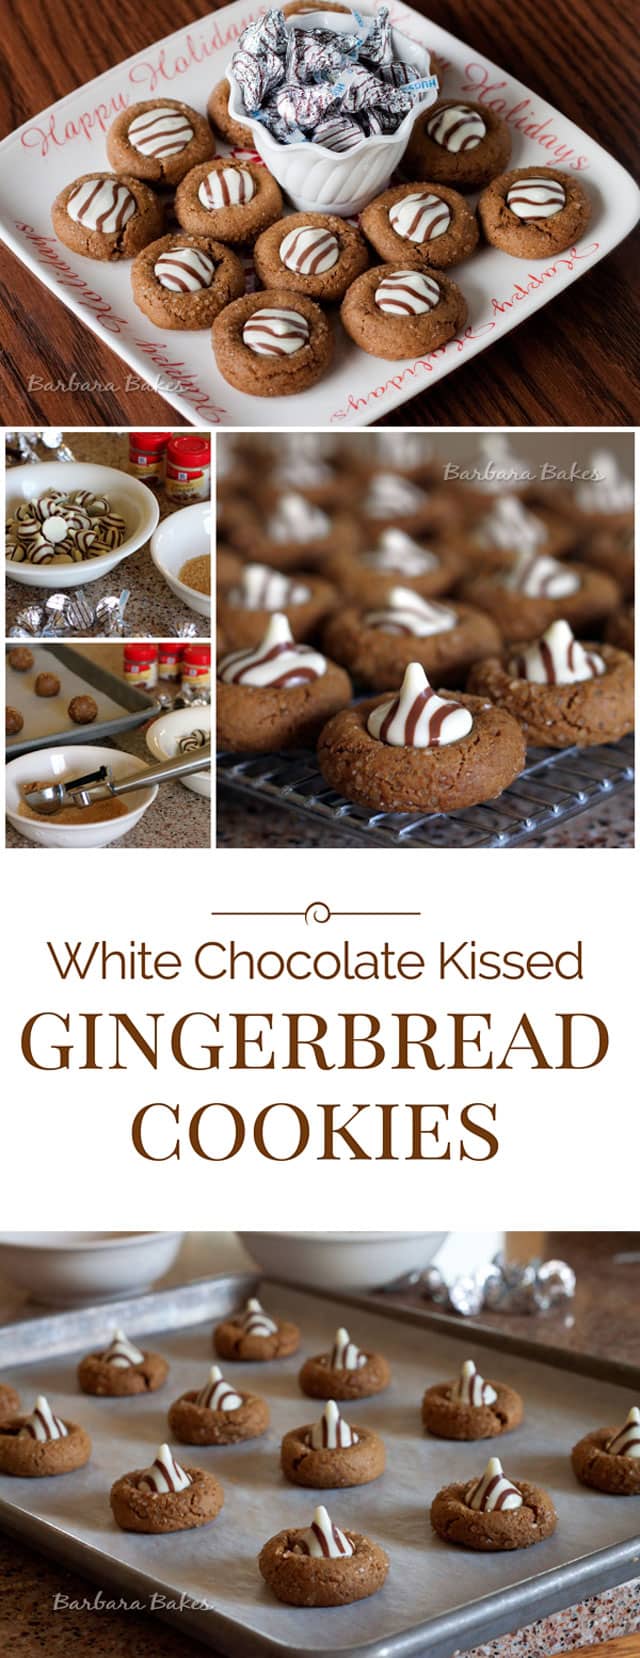 White-Chocolate-Kissed-Gingerbread-Cookies-Collage-2-Barbara-Bakes